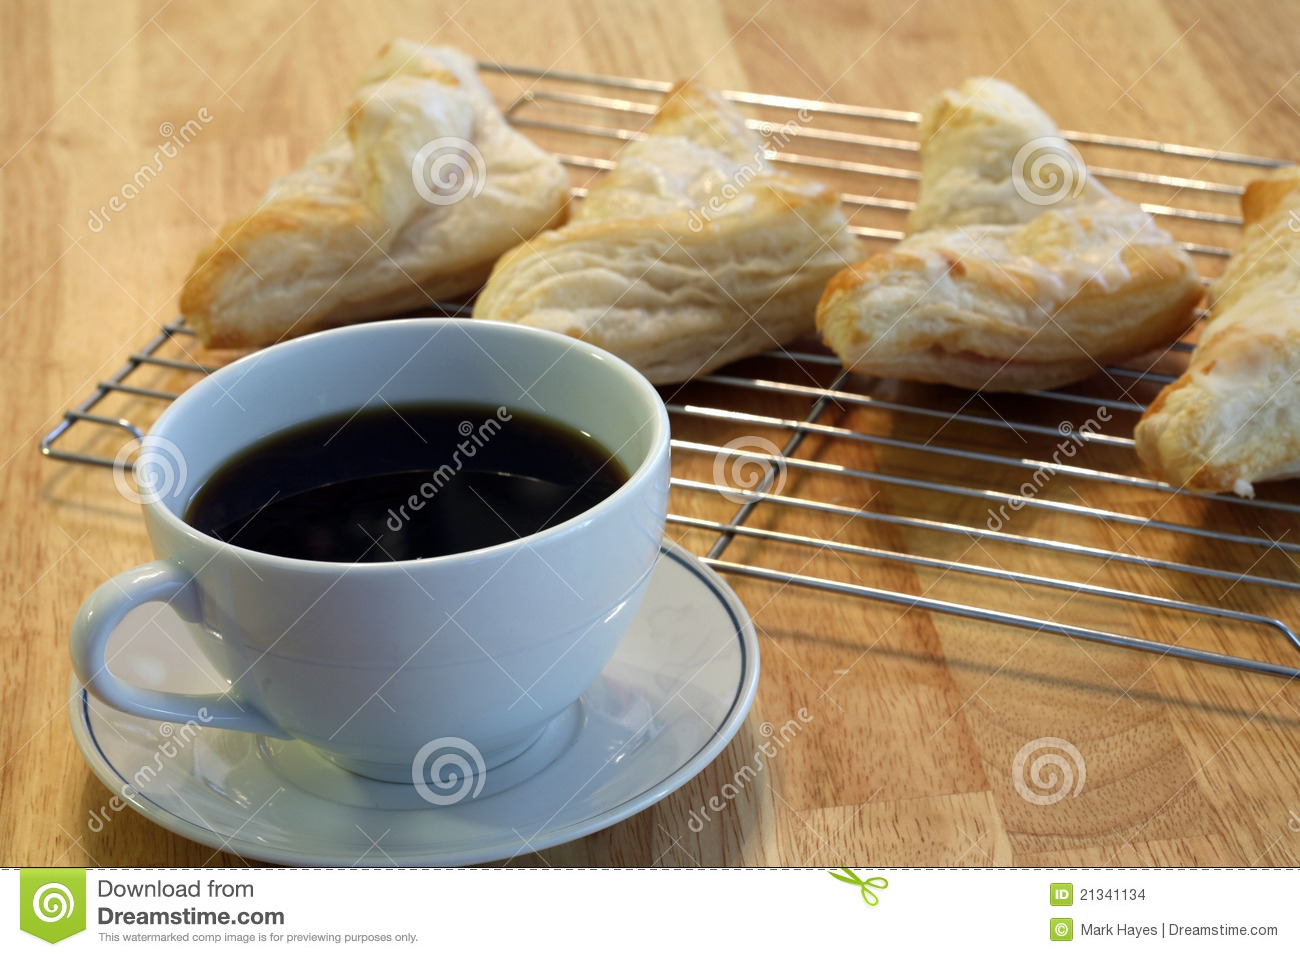 Cup Of Hot Coffee And A Fresh Backed Pastry For Breakfast 